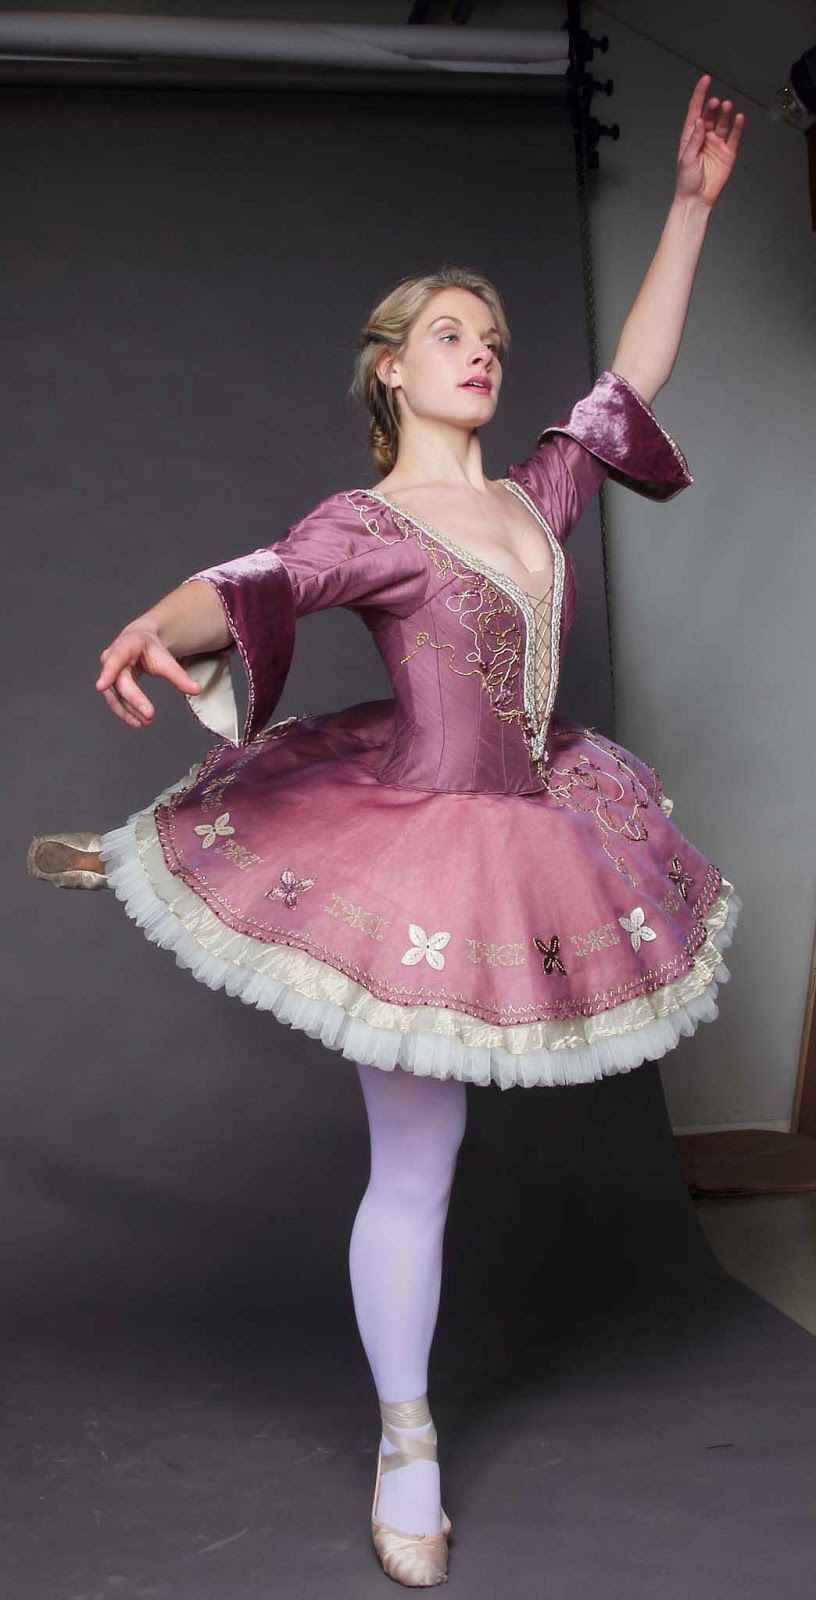 Belle Dame: The Silver Thimble: Ballet Tutu Photoshoot- Lilac Fairy and